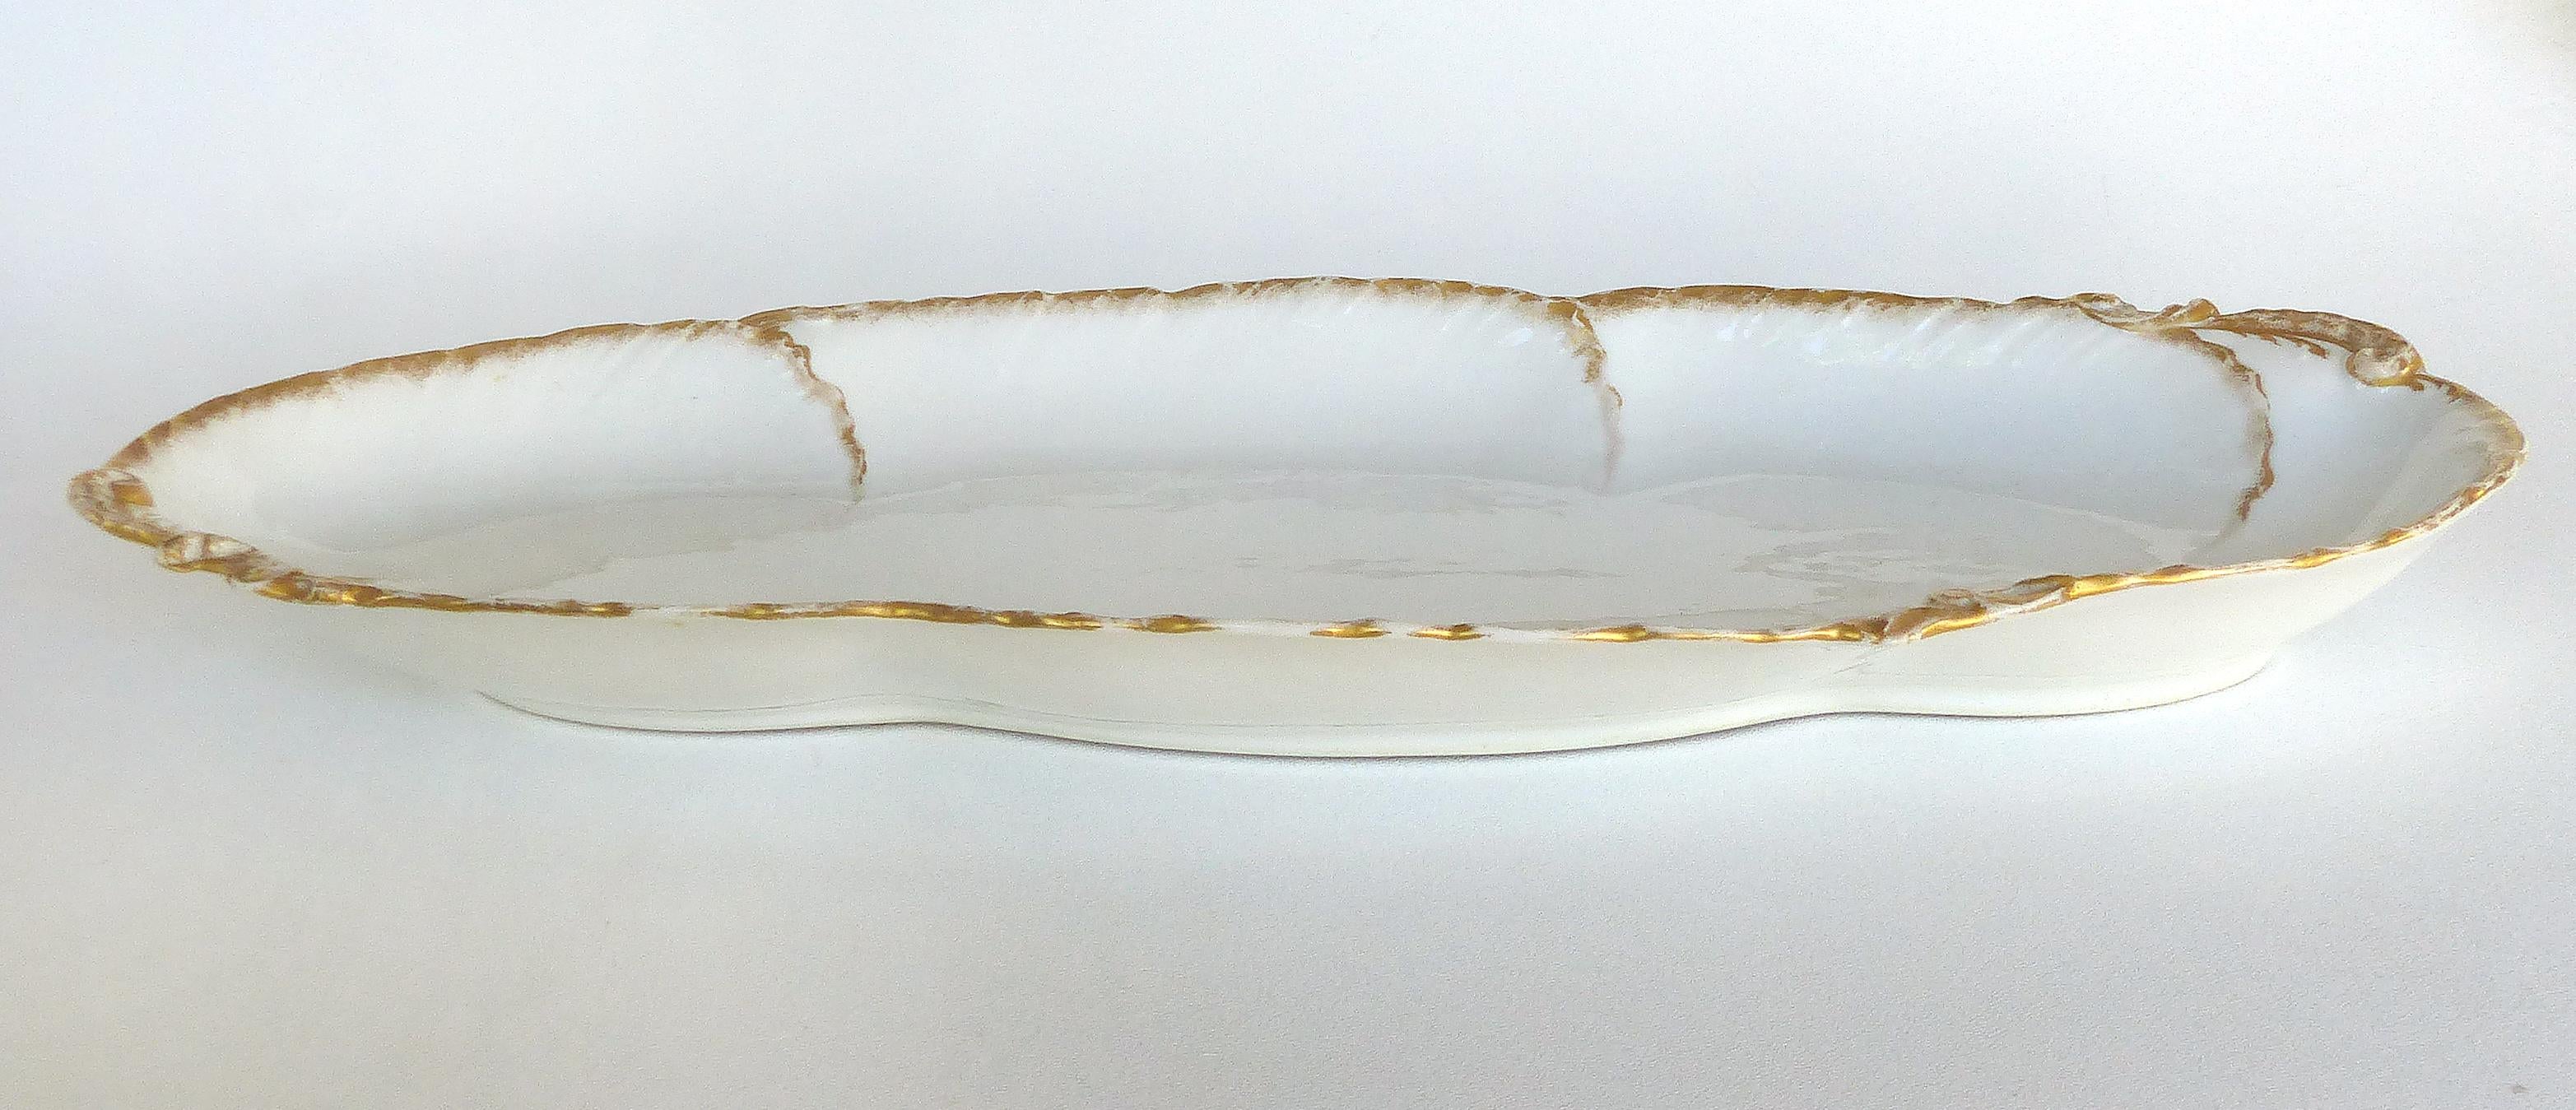 Offered for sale is a William Guerin (W.G. & Co.) Limoges, France oval gilt porcelain serving platter with scalloped edges and gilt detailing. Marked on the underside as pictured.